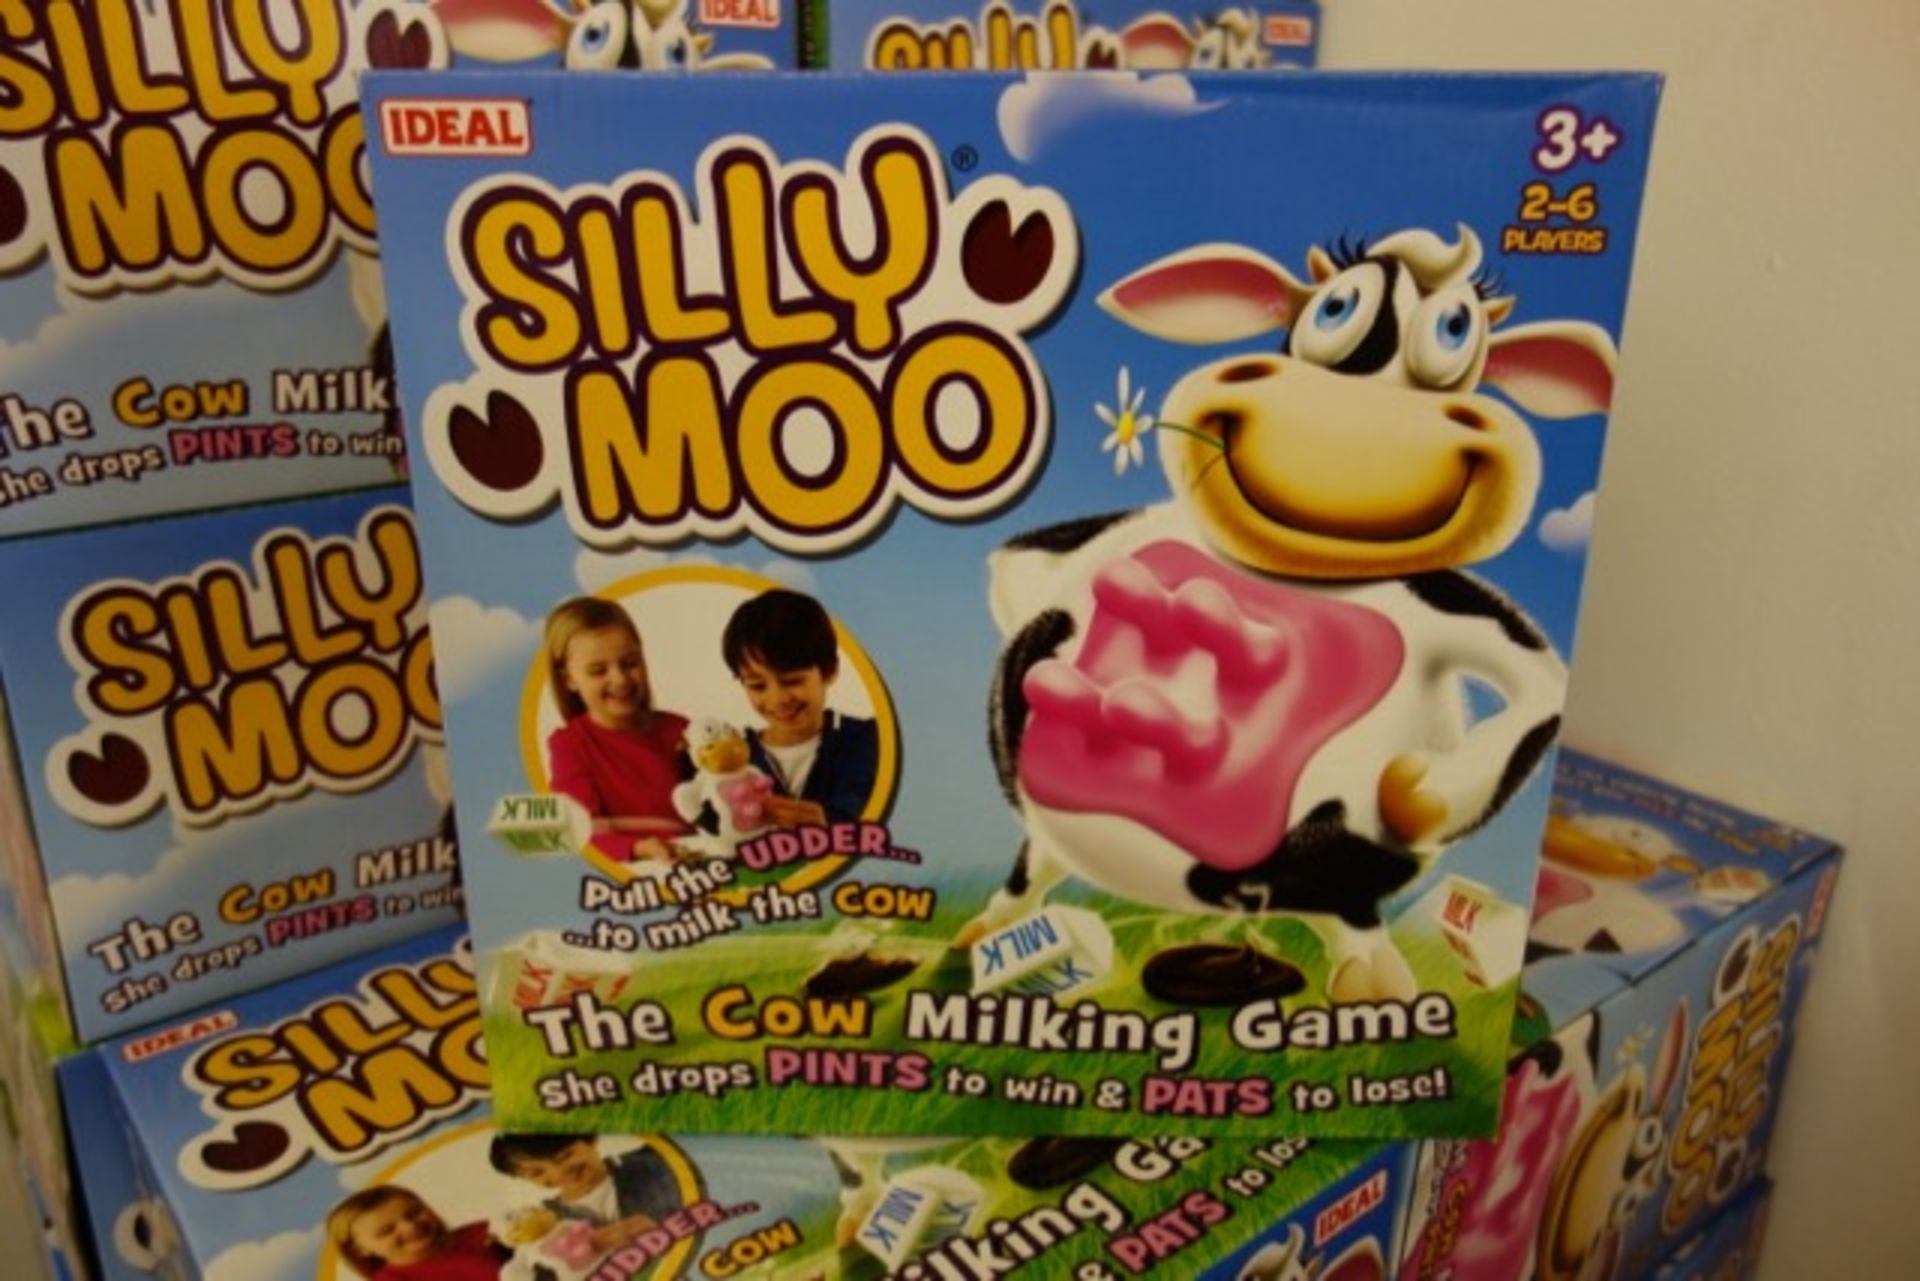 8 x Brand New - Silly Moo - The Cow Milking Game Playset